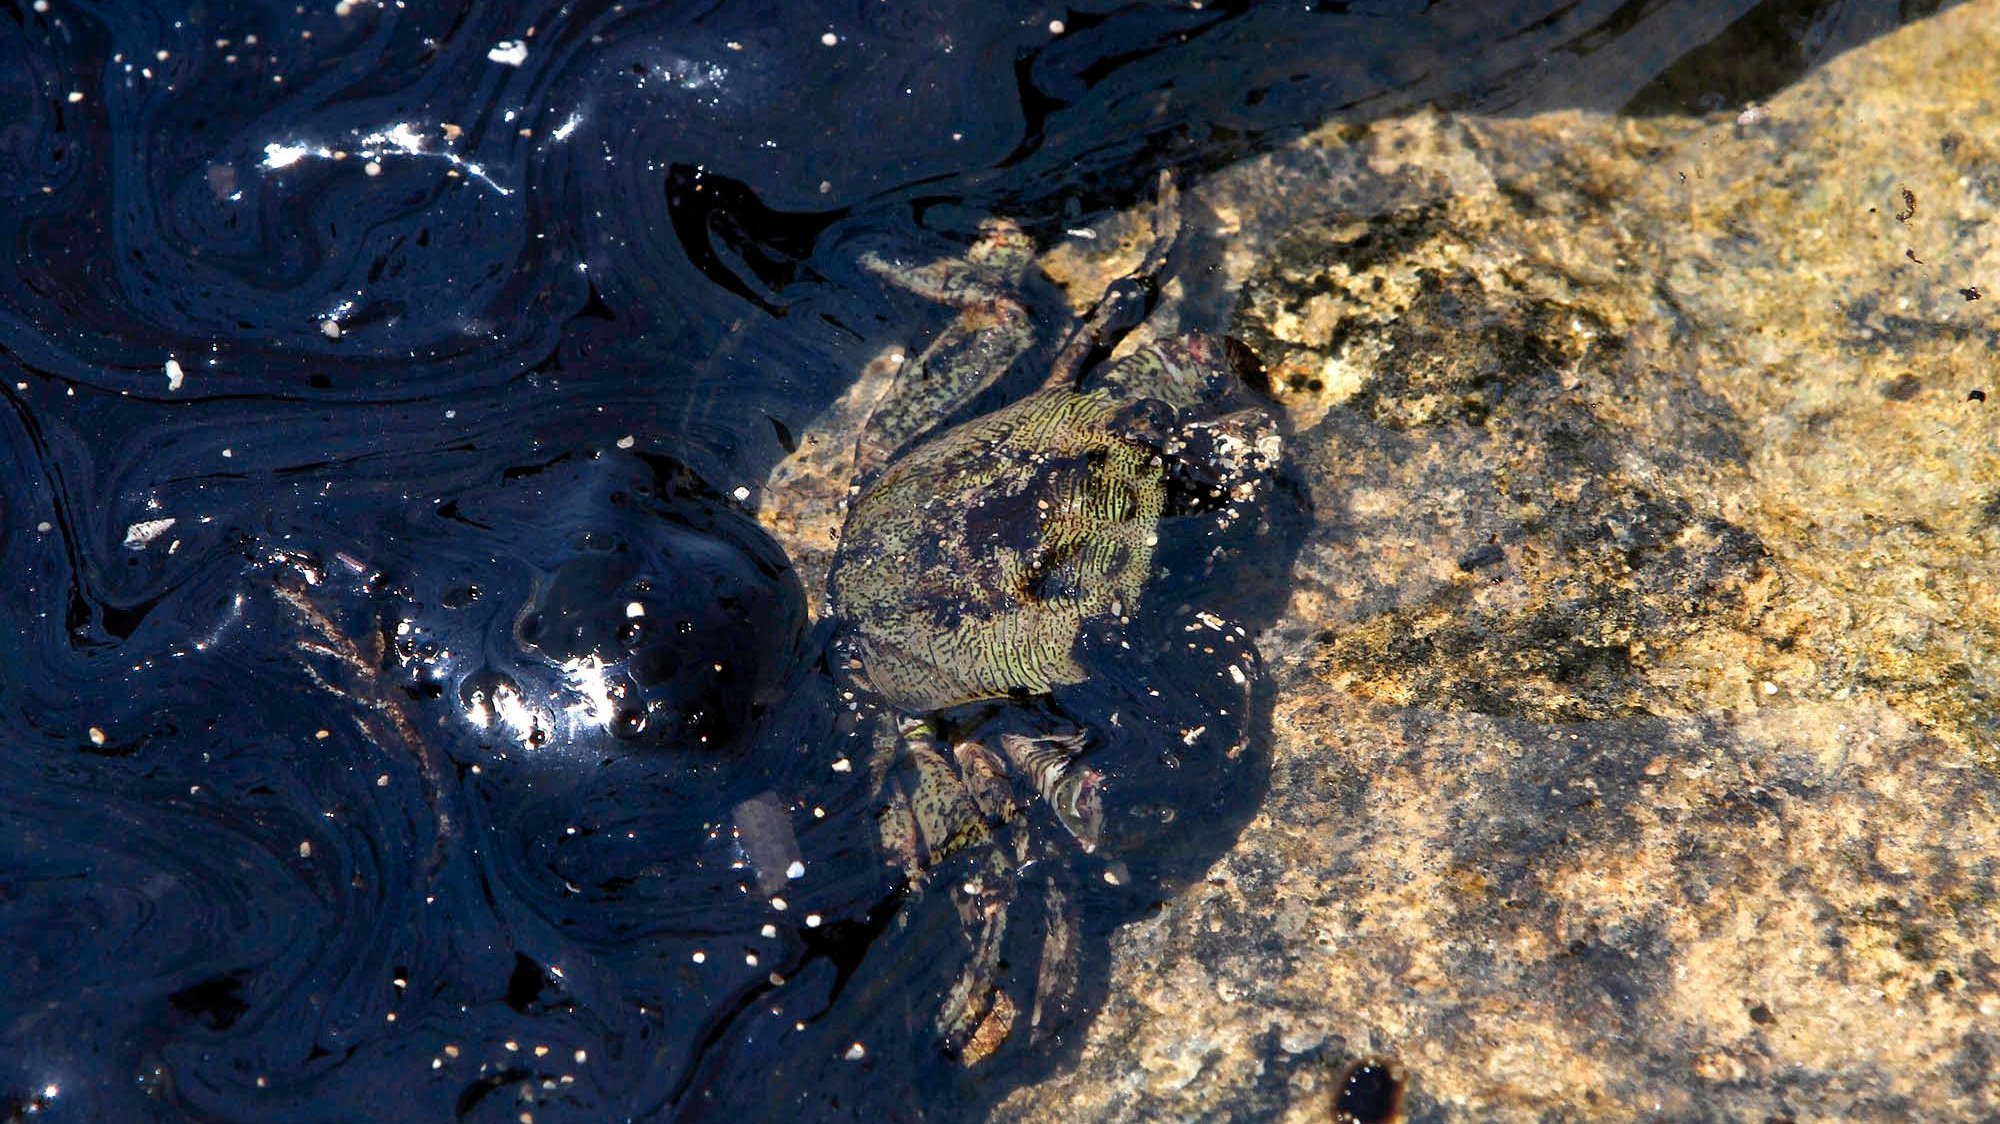 epa03793300 A crab in the oil spill at the Karpasia peninsula in the Turkish-occupied northern tip of Cyprus, 19 July 2013. Cypriot authorities sent help to the occupied area to deal with the oil spill after 100 tonnes of oil leaked into the sea when a pipeline from a tanker broke during attempts to supply a power station.  EPA/STRINGER